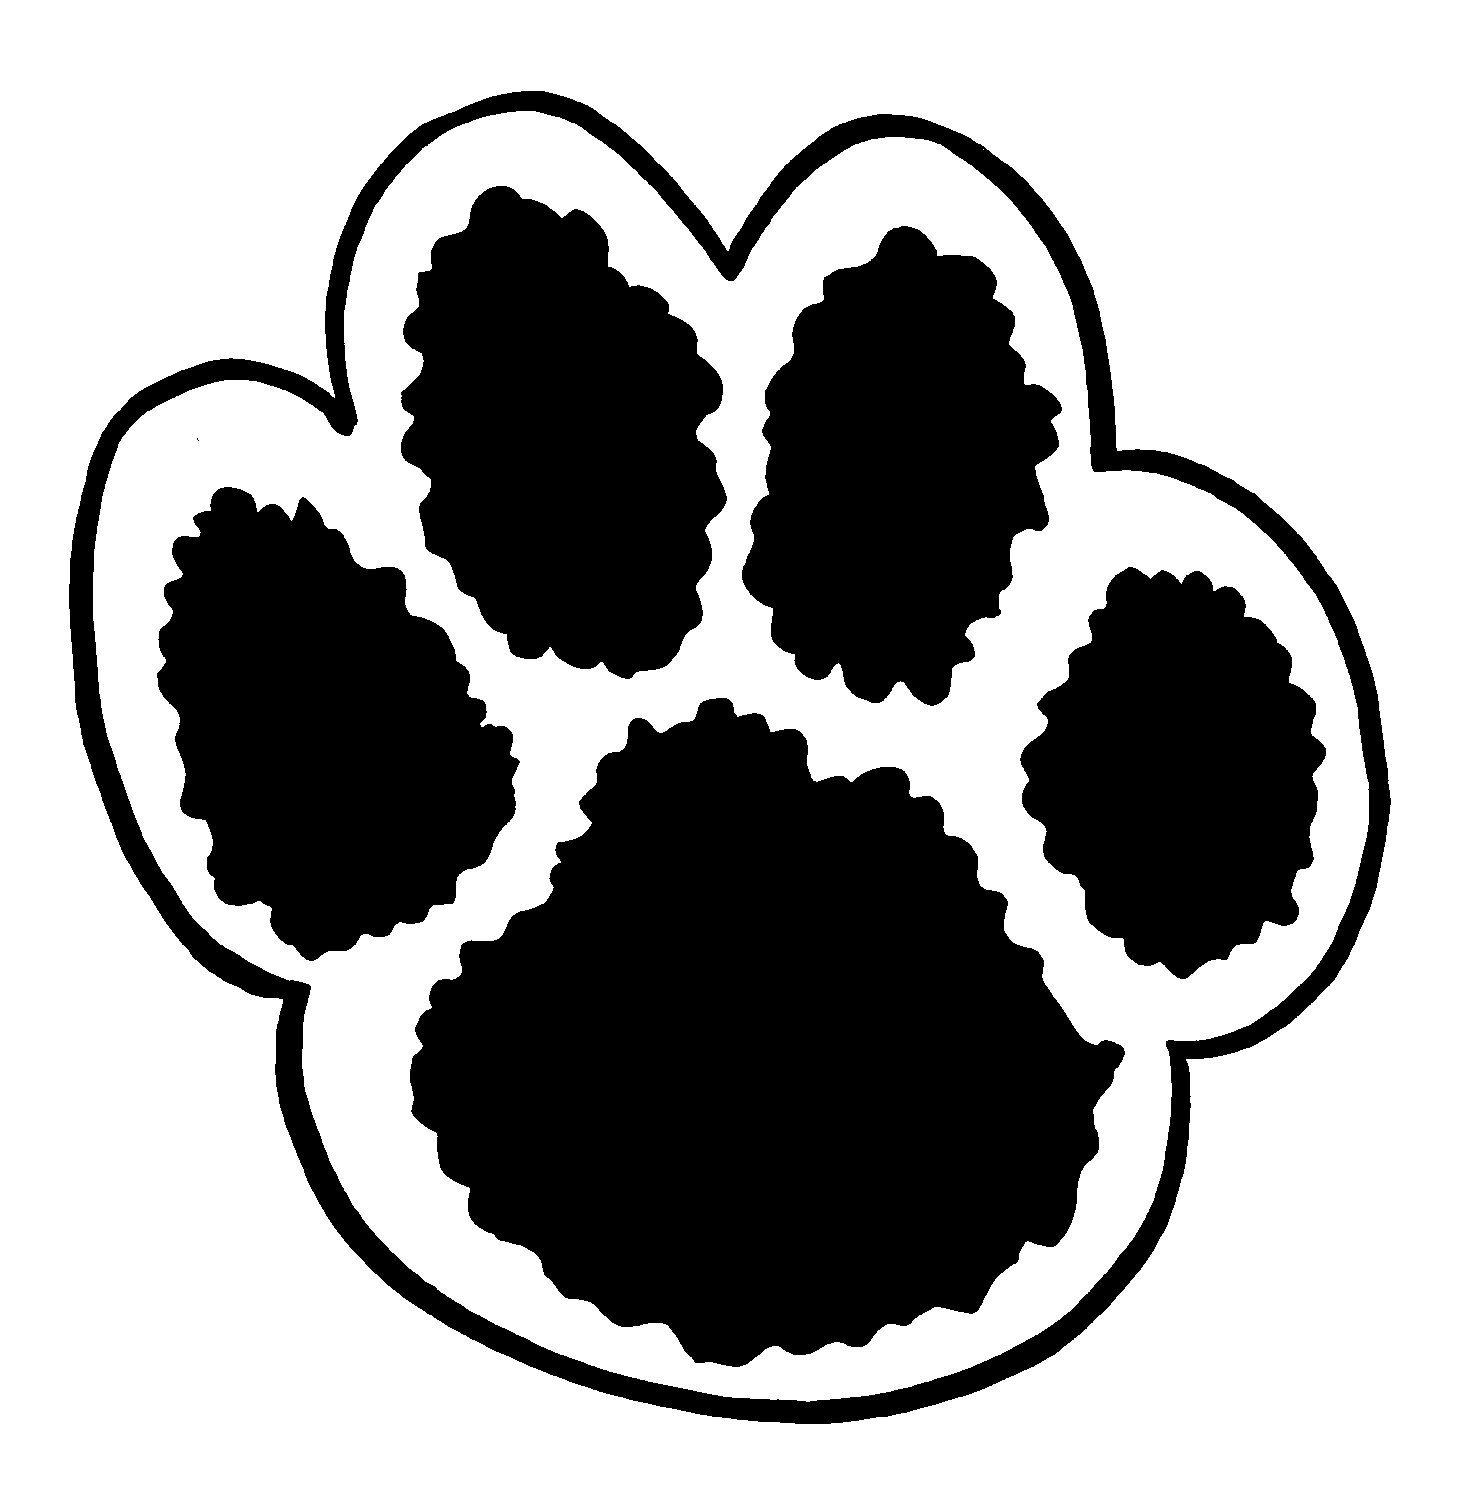 Bear Paw Drawing - ClipArt Best